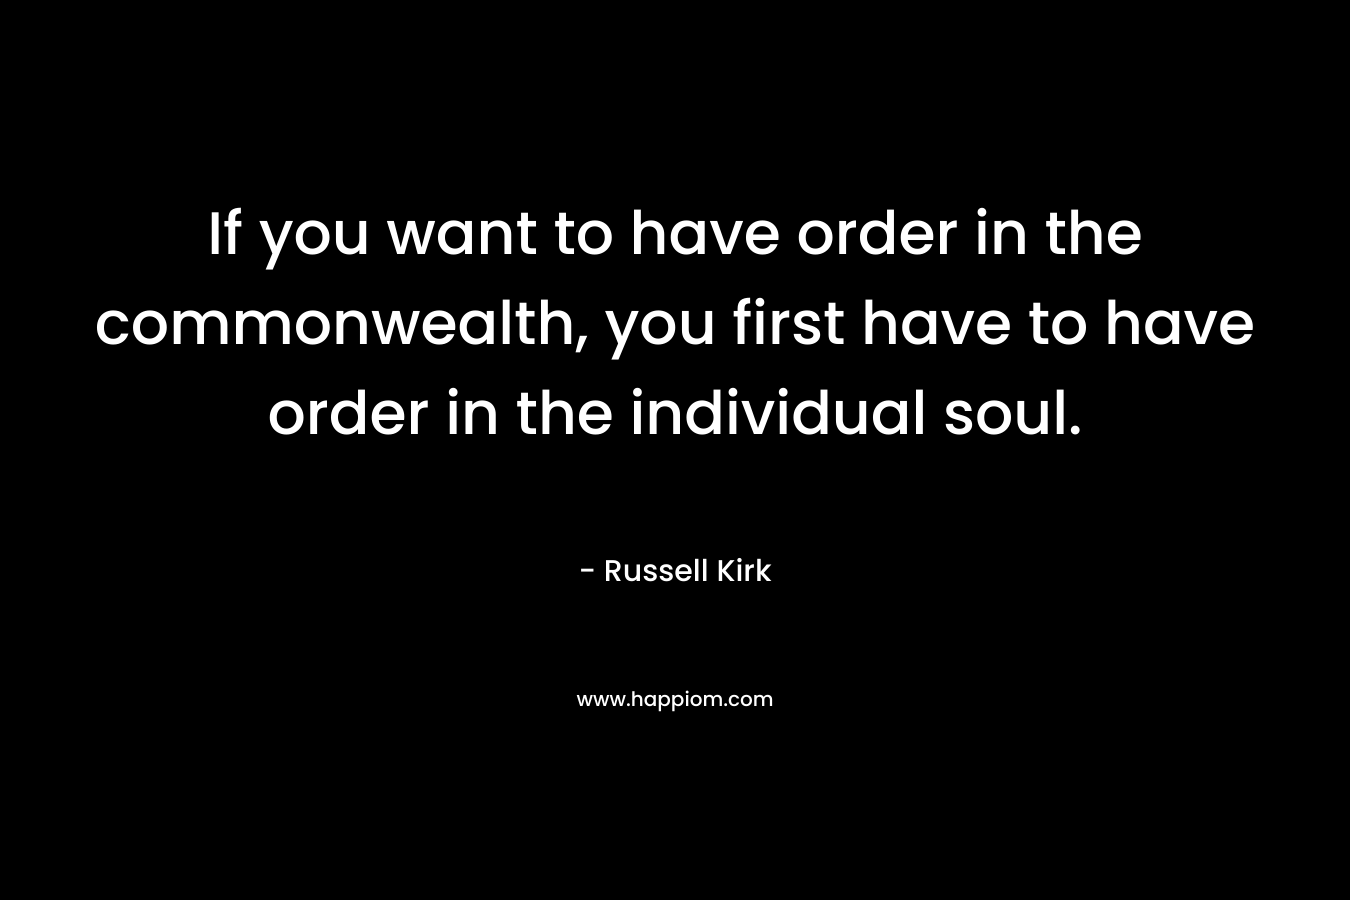 If you want to have order in the commonwealth, you first have to have order in the individual soul. – Russell Kirk